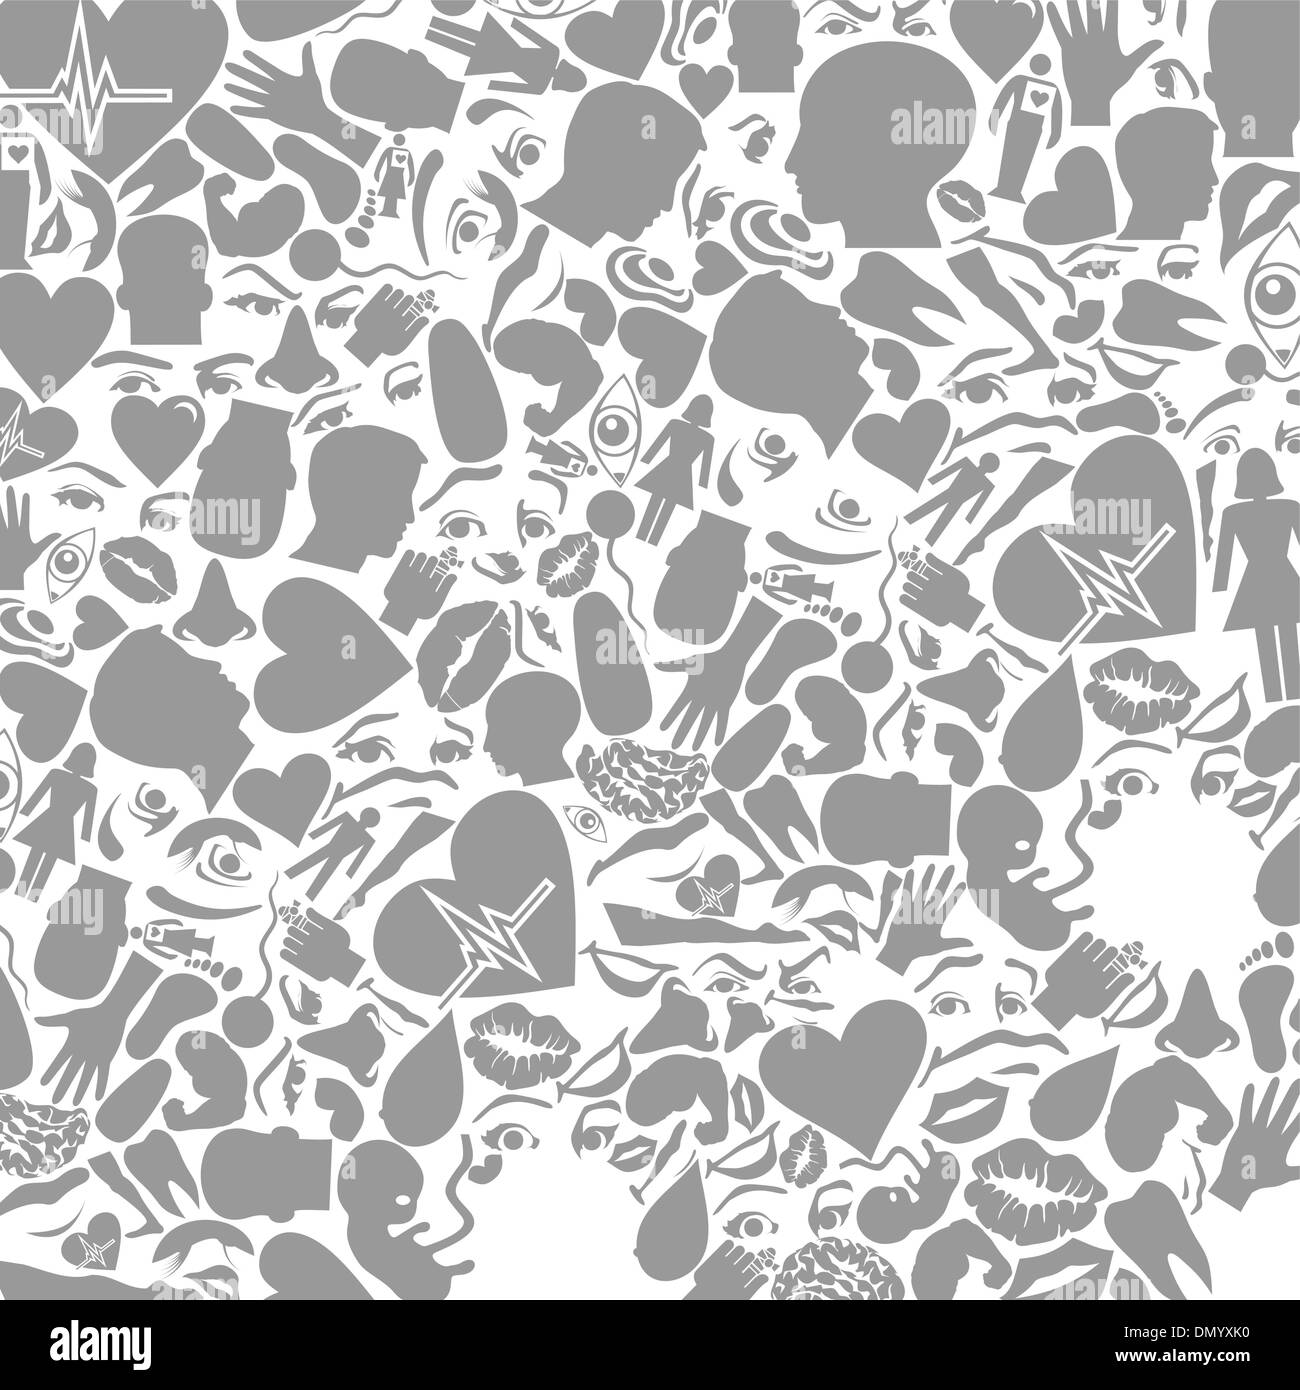 Background of a part of a body Stock Vector